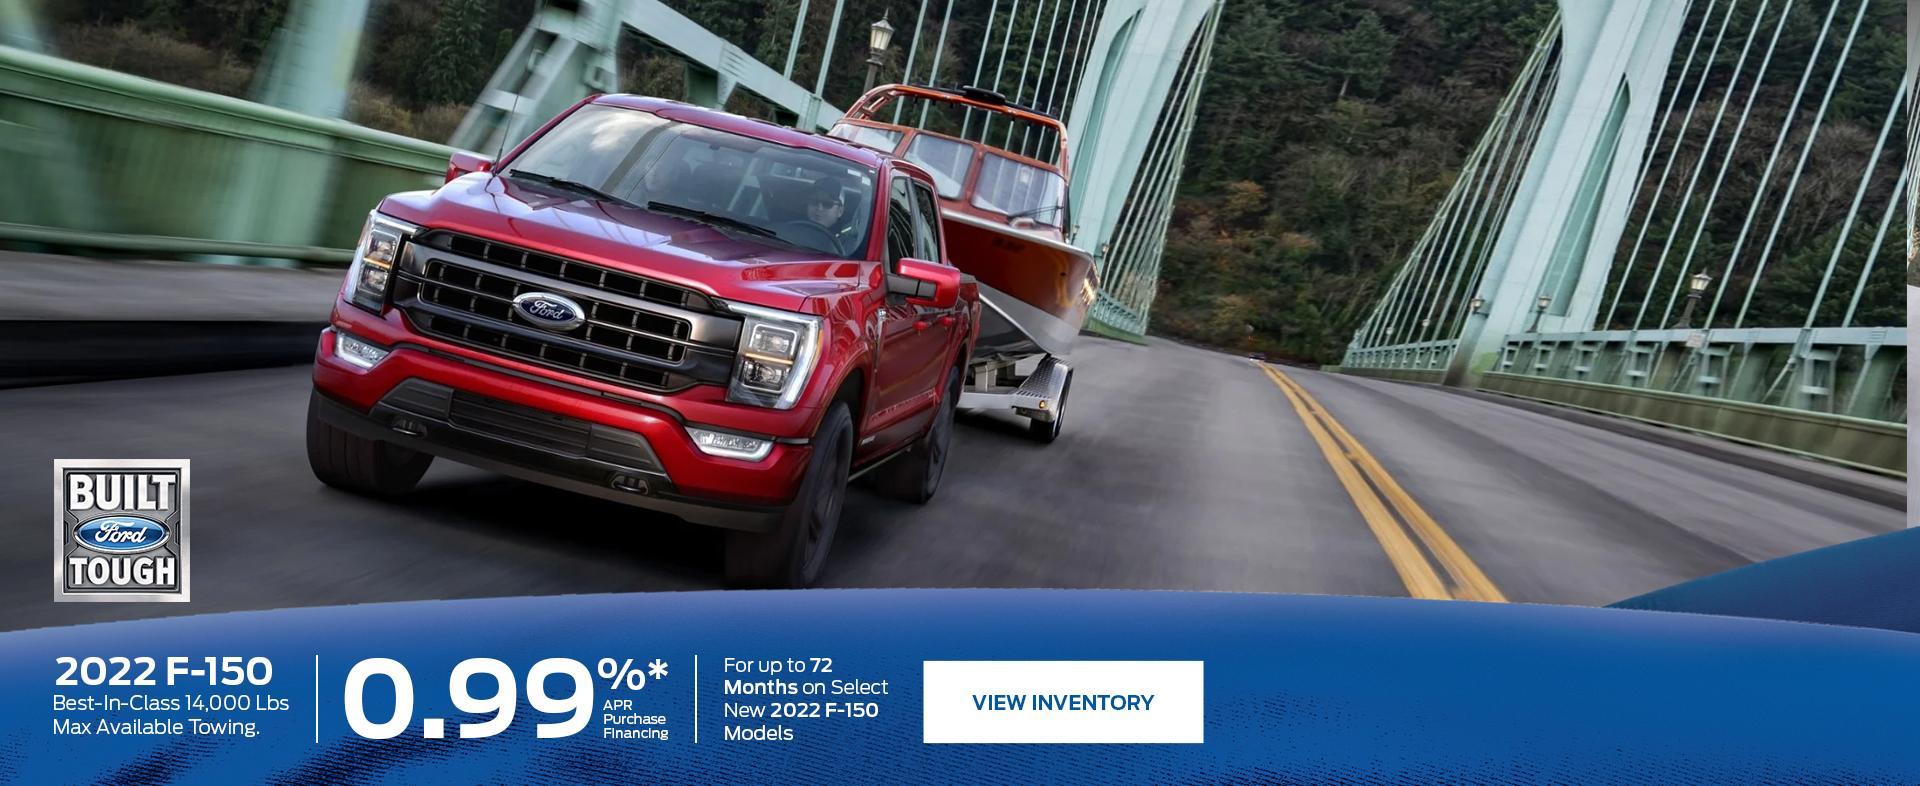 Ford F-150 | Ford of Canada